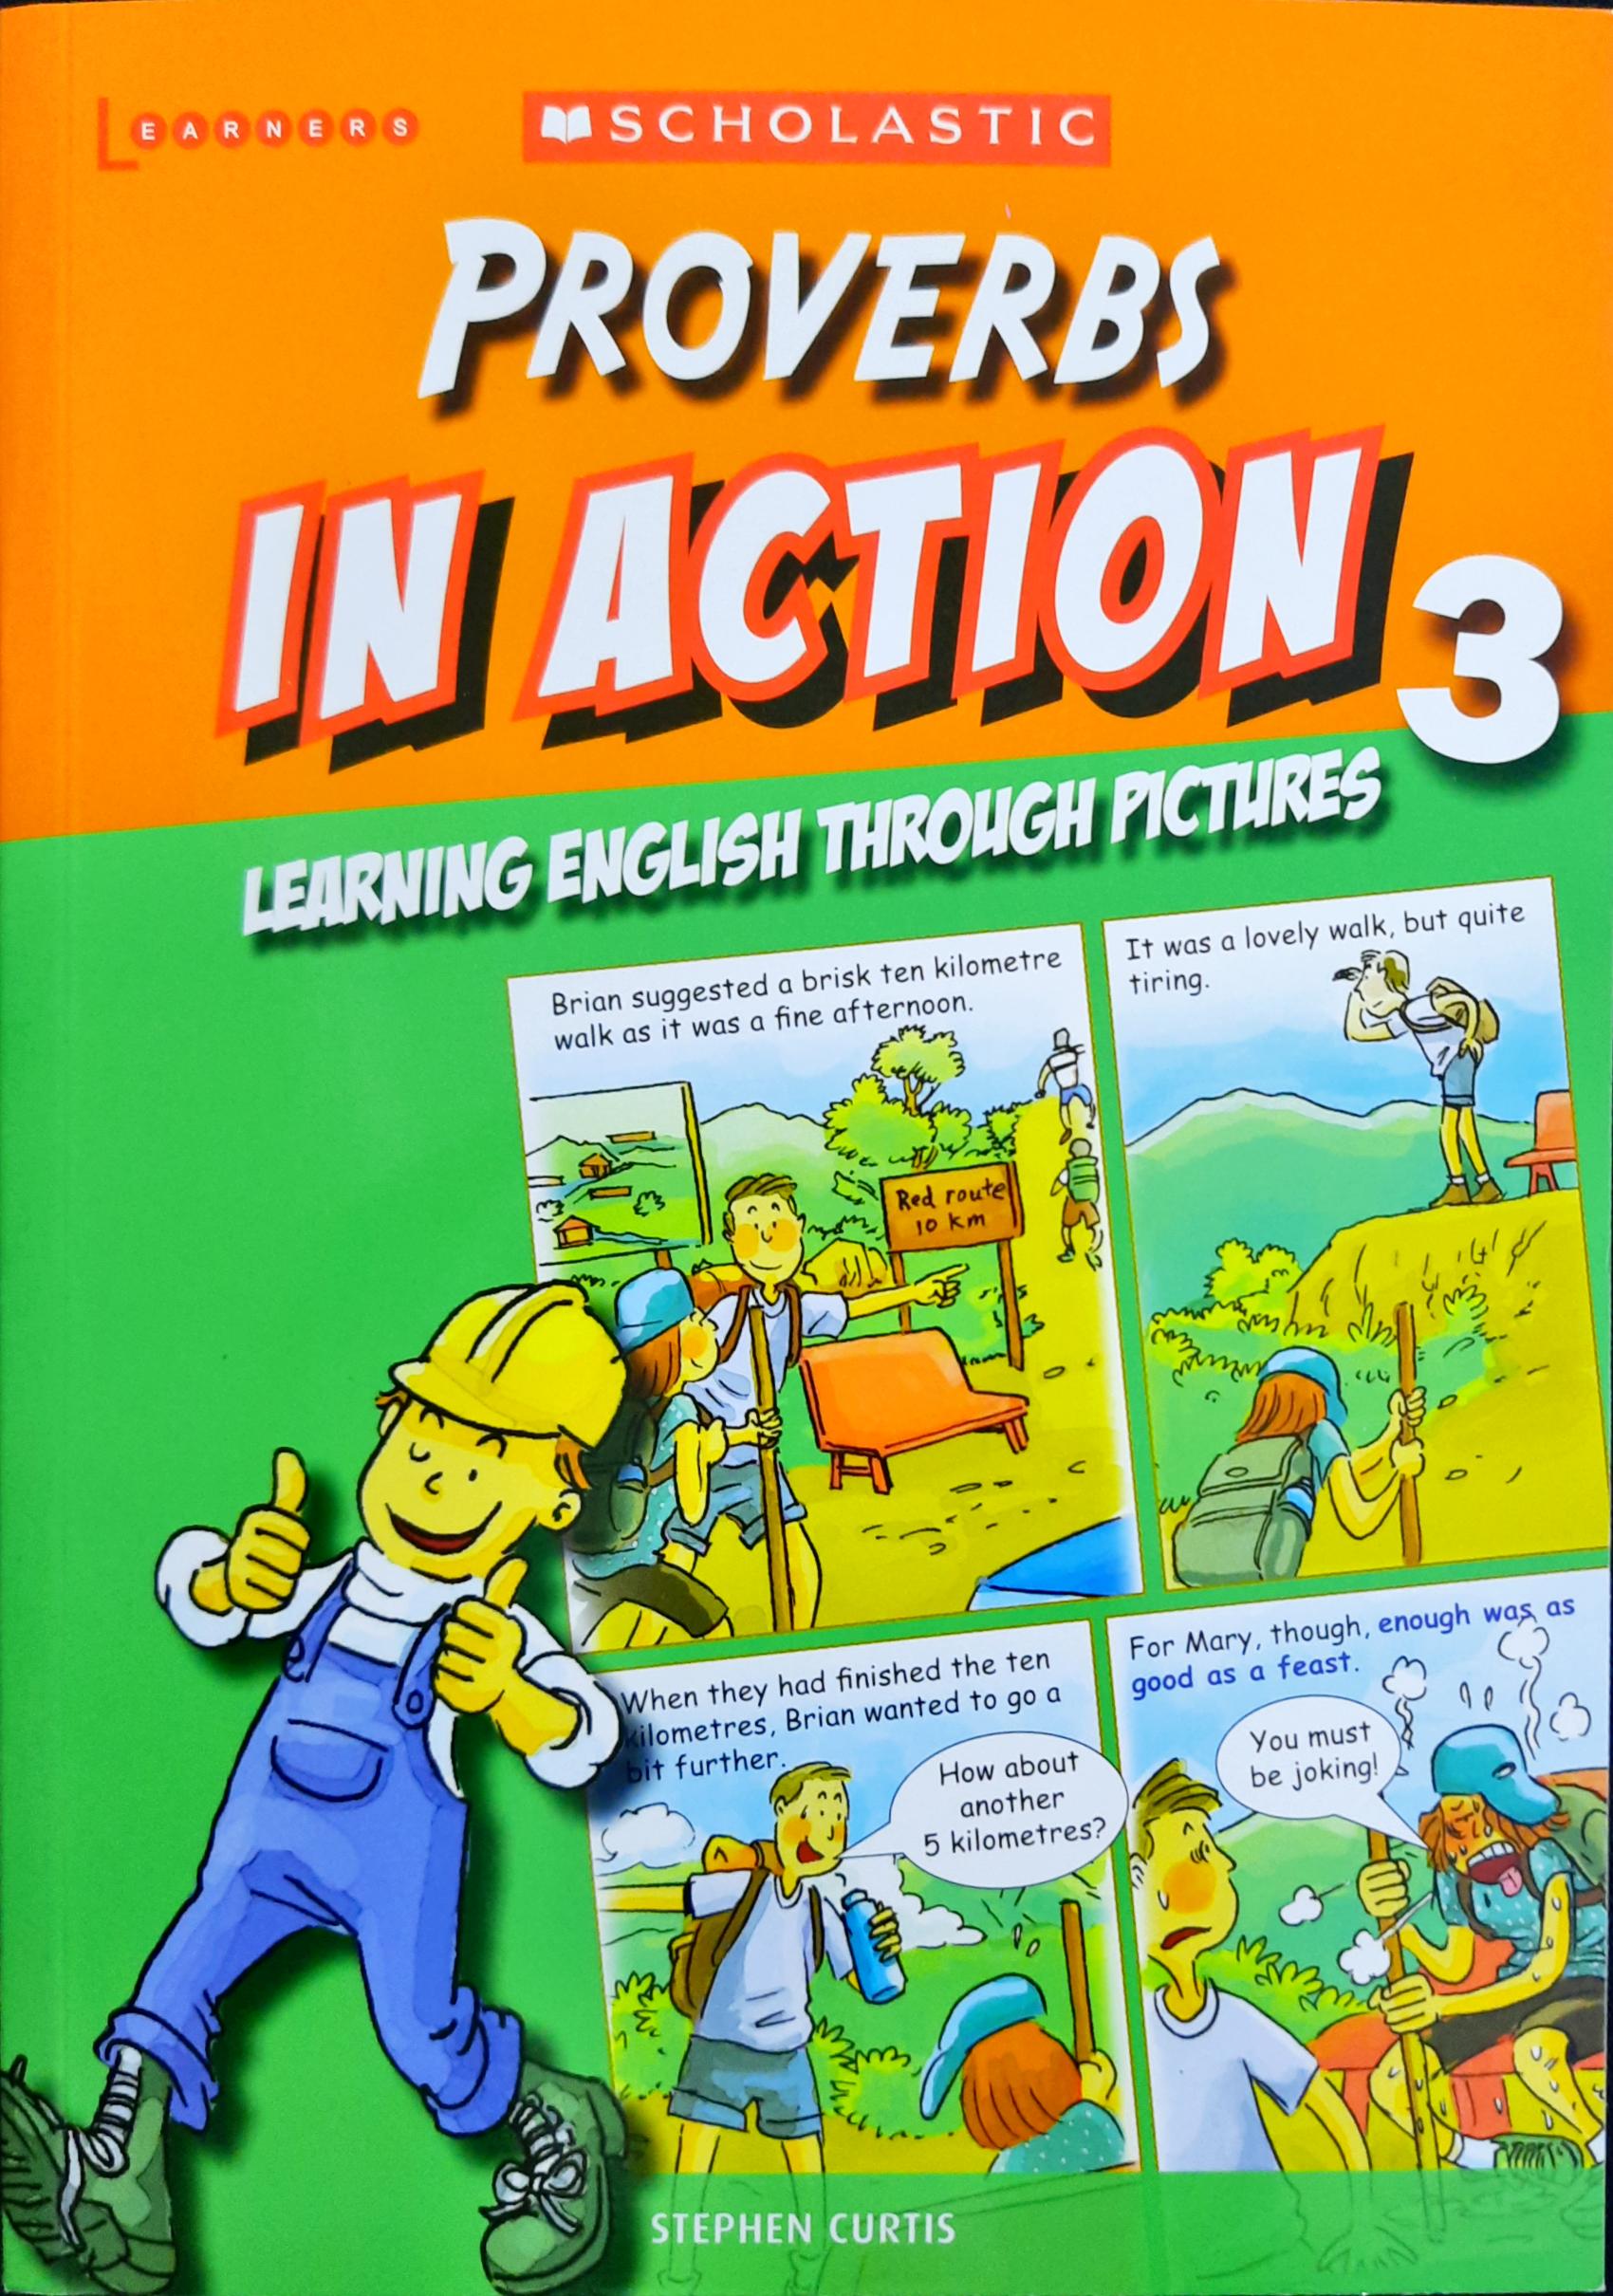 Proverbs In Action 3 - Learning English Through Pictures